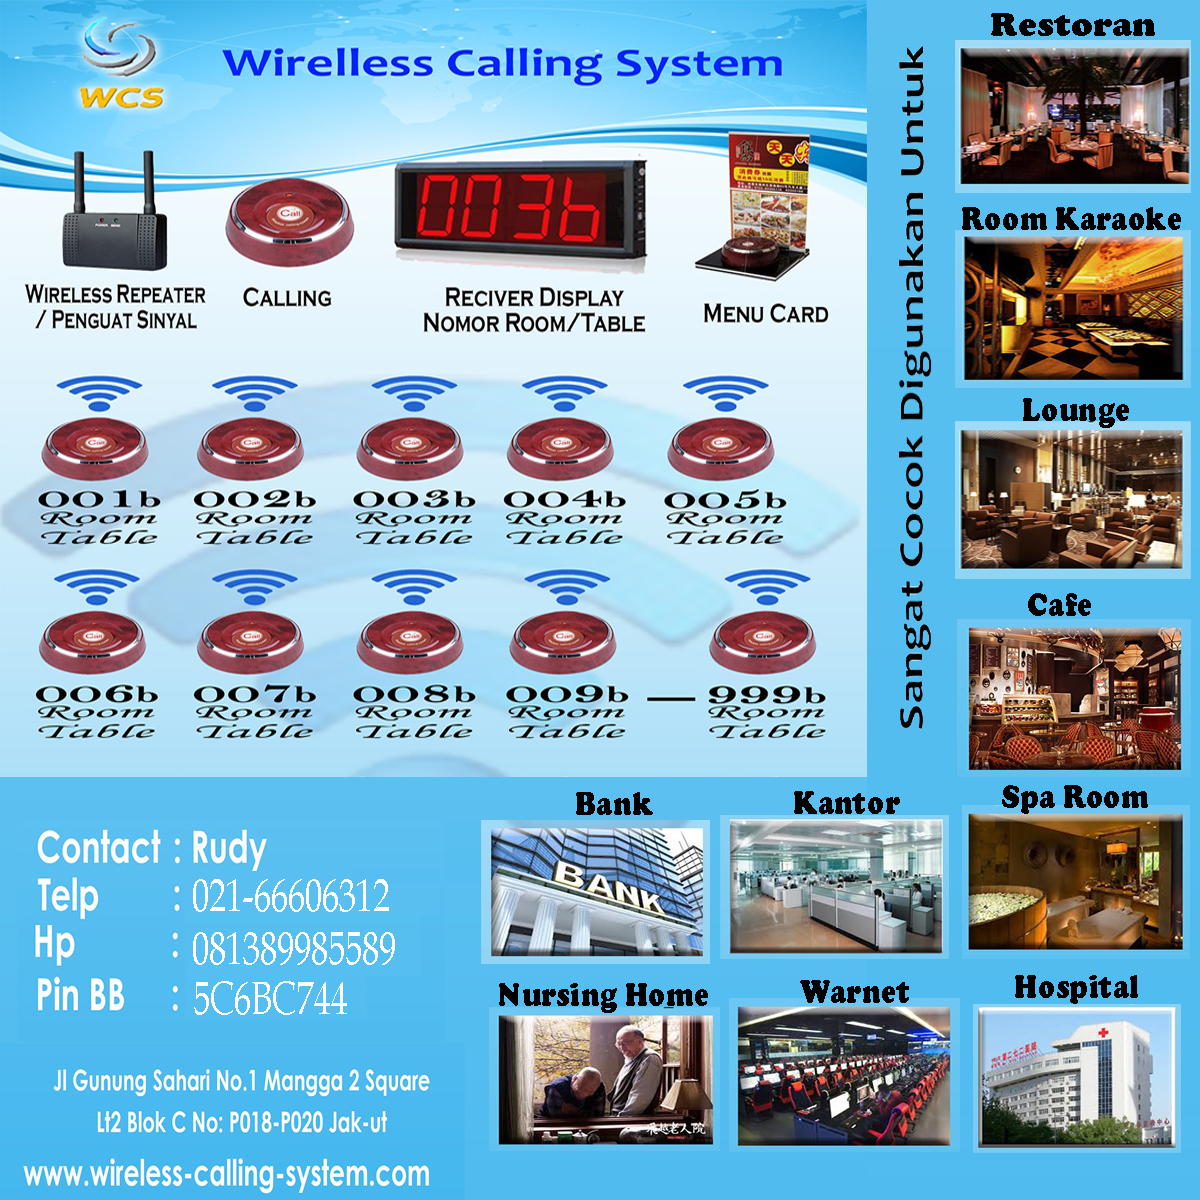 Wireless Calling System WCS